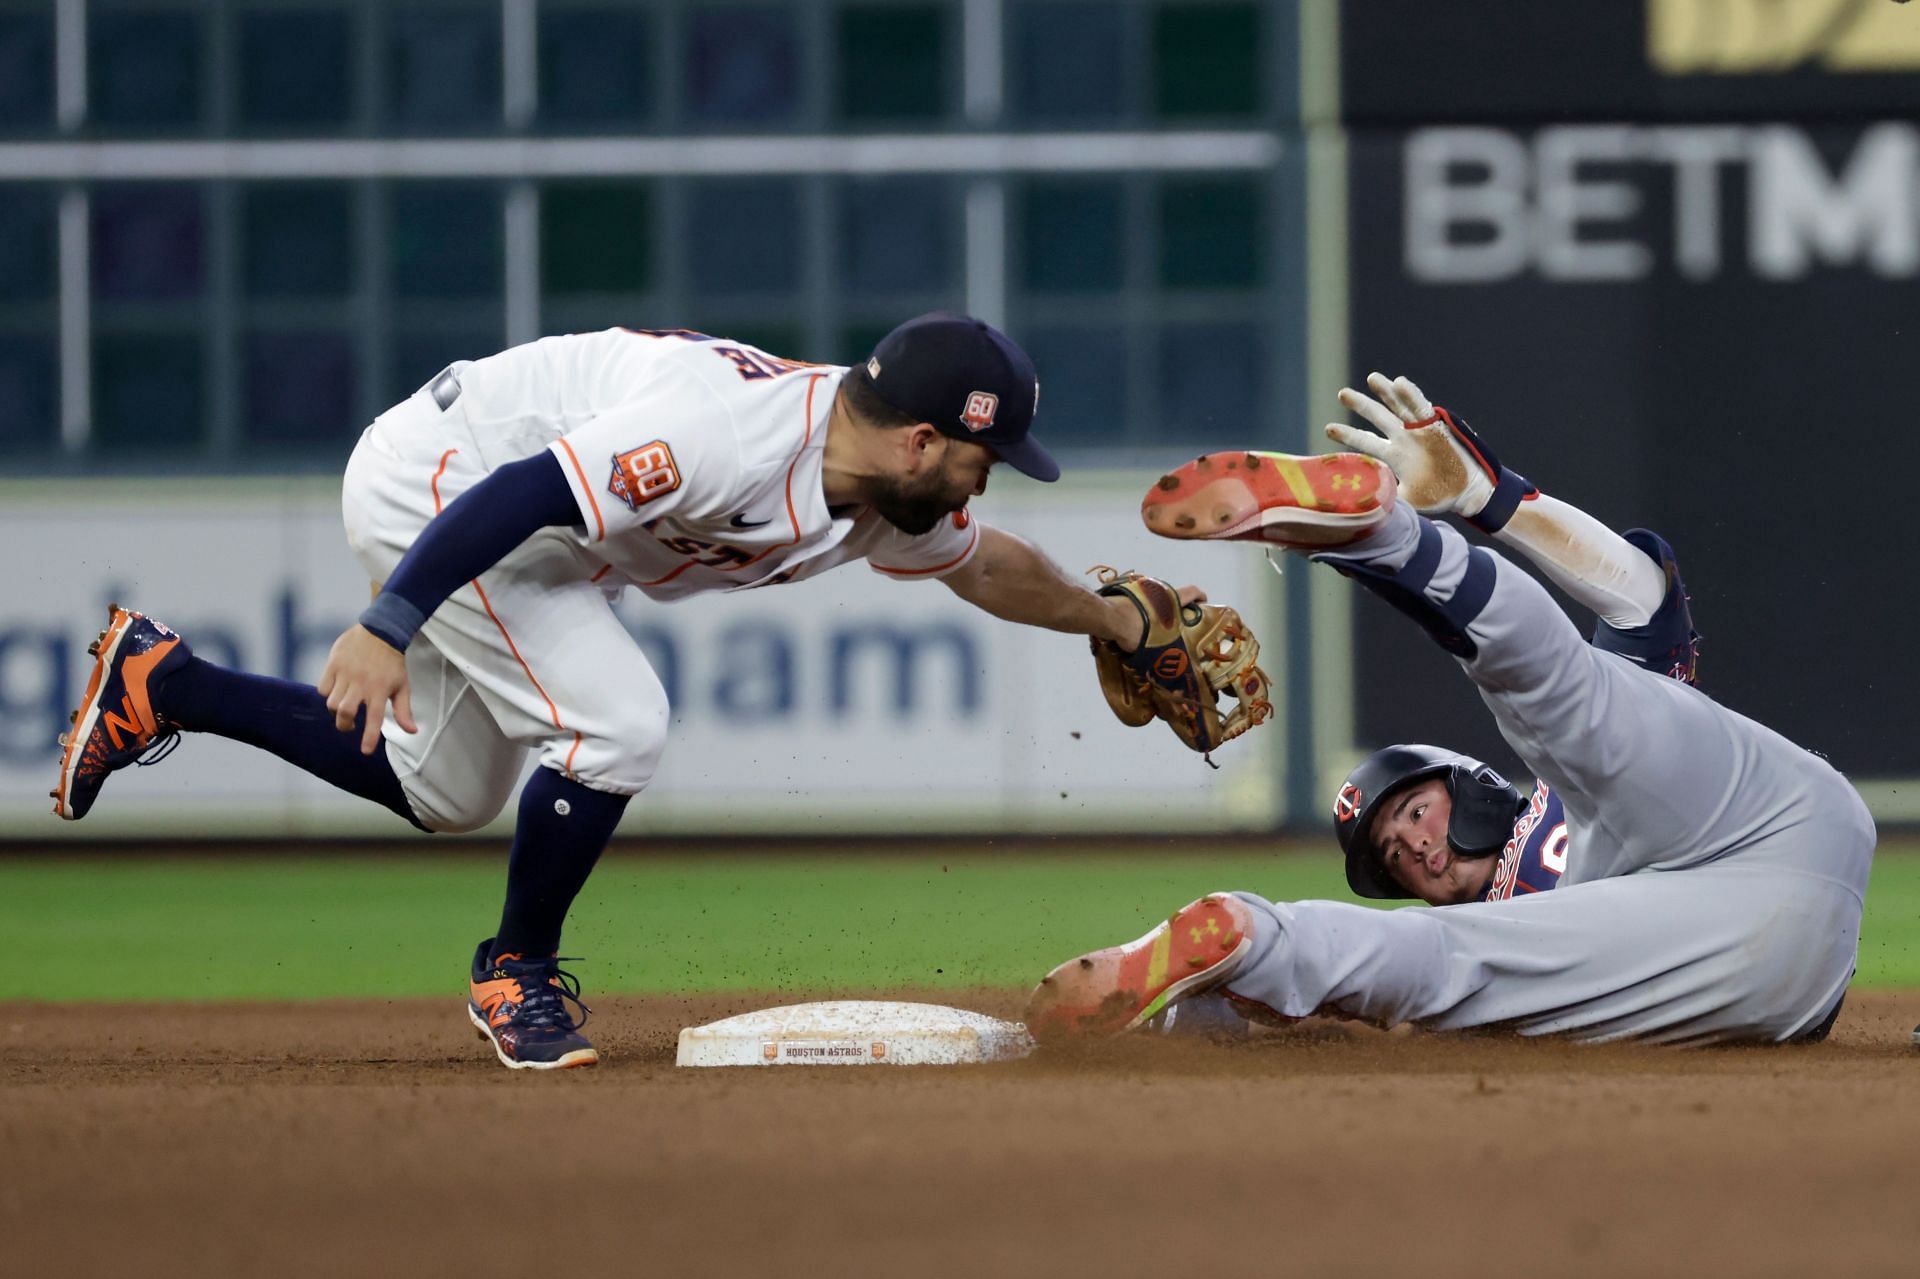 The Astros Tanked Their Way To The Top